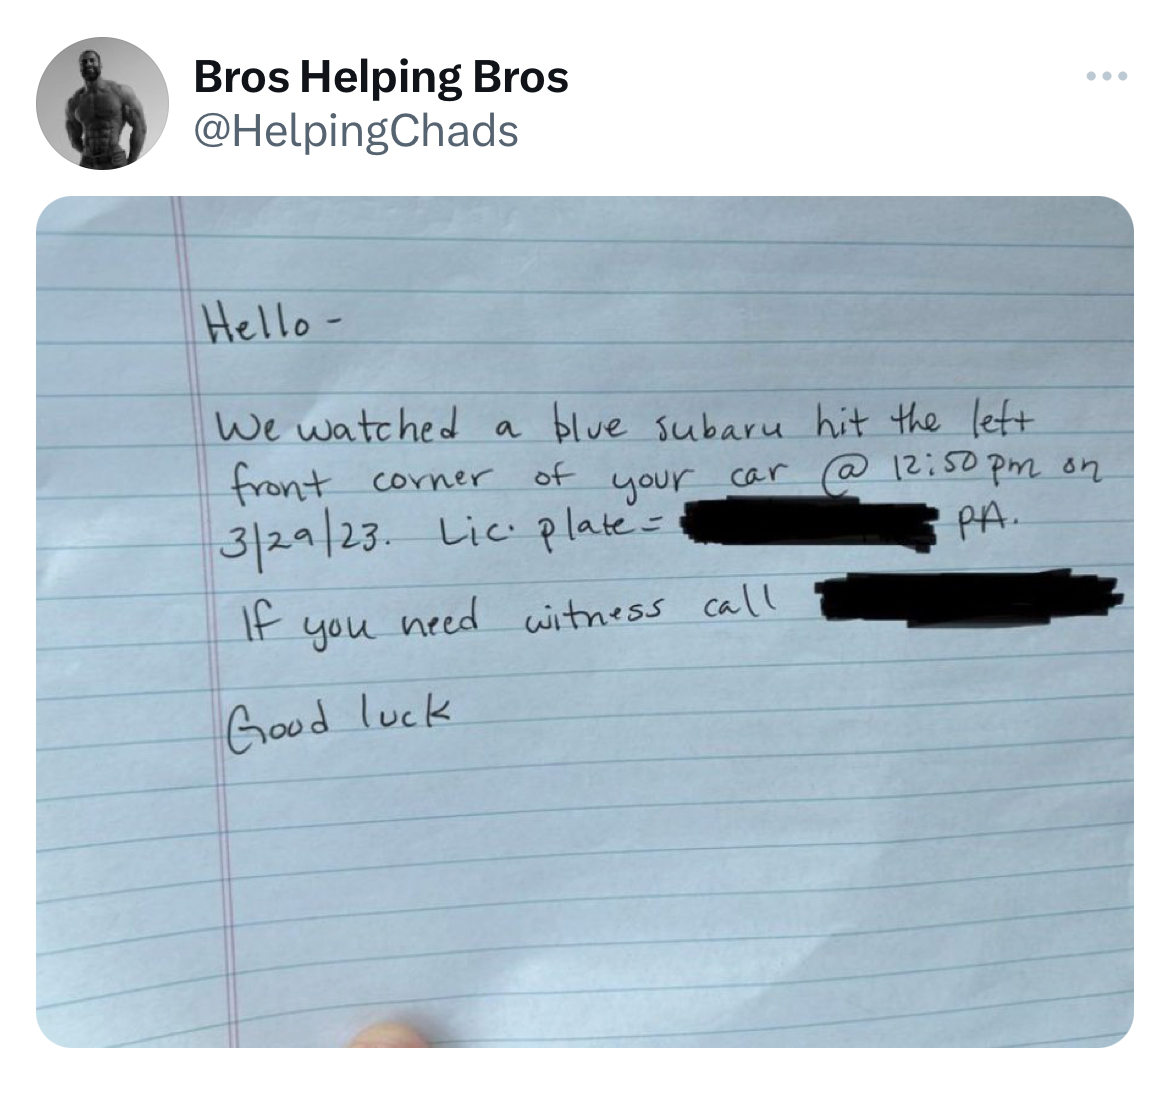 Tweets of the week - writing - Bros Helping Bros Hello We watched a blue subaru hit the lett. of your car @ pm on Pa. front corner 32923. Lic plate' If need witness call www you Good luck